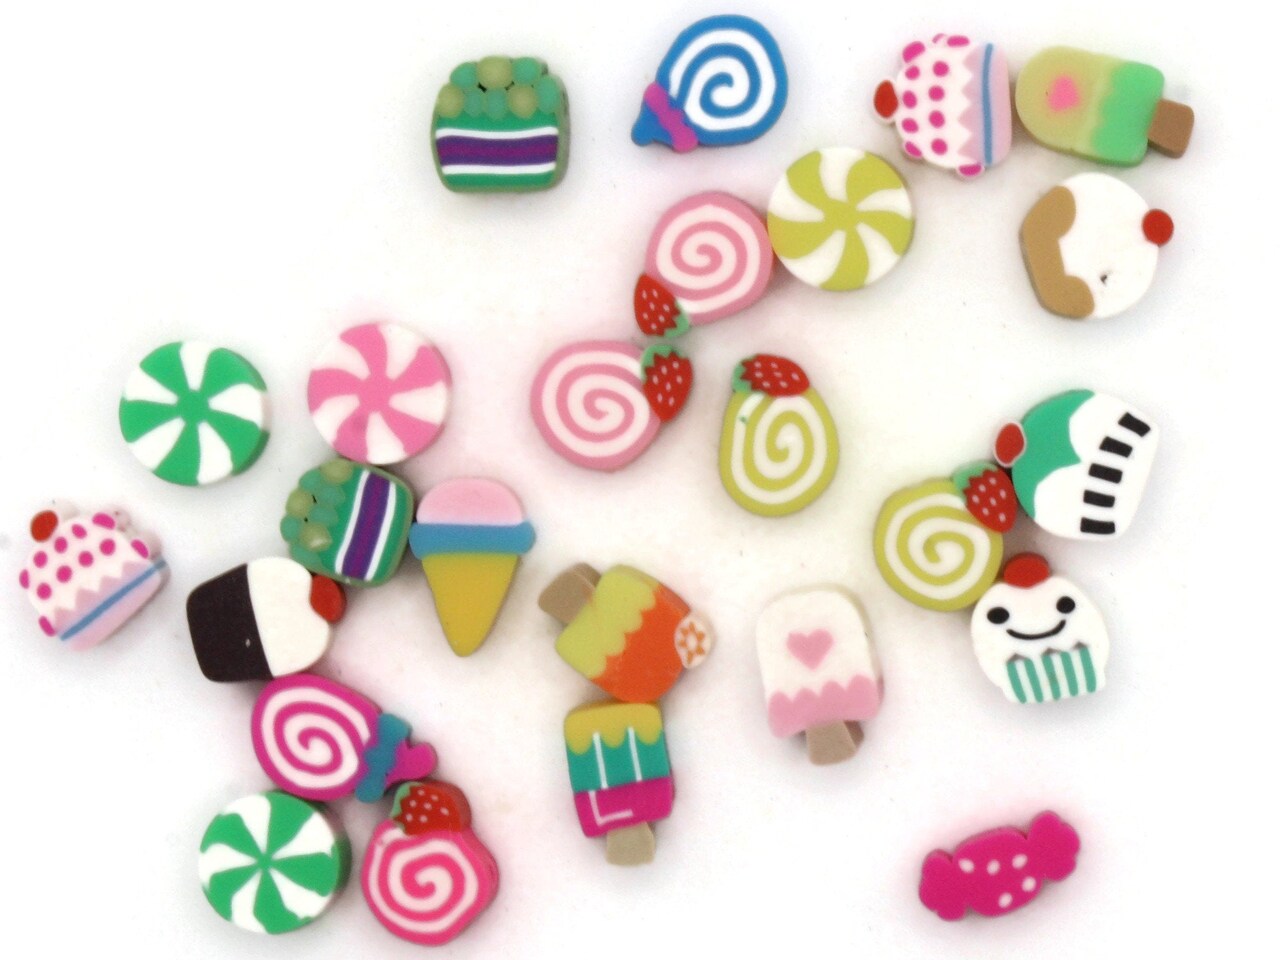 25 10mm Cupcake, Popsicle, Ice Cream and Candy Beads - Mixed Sweet